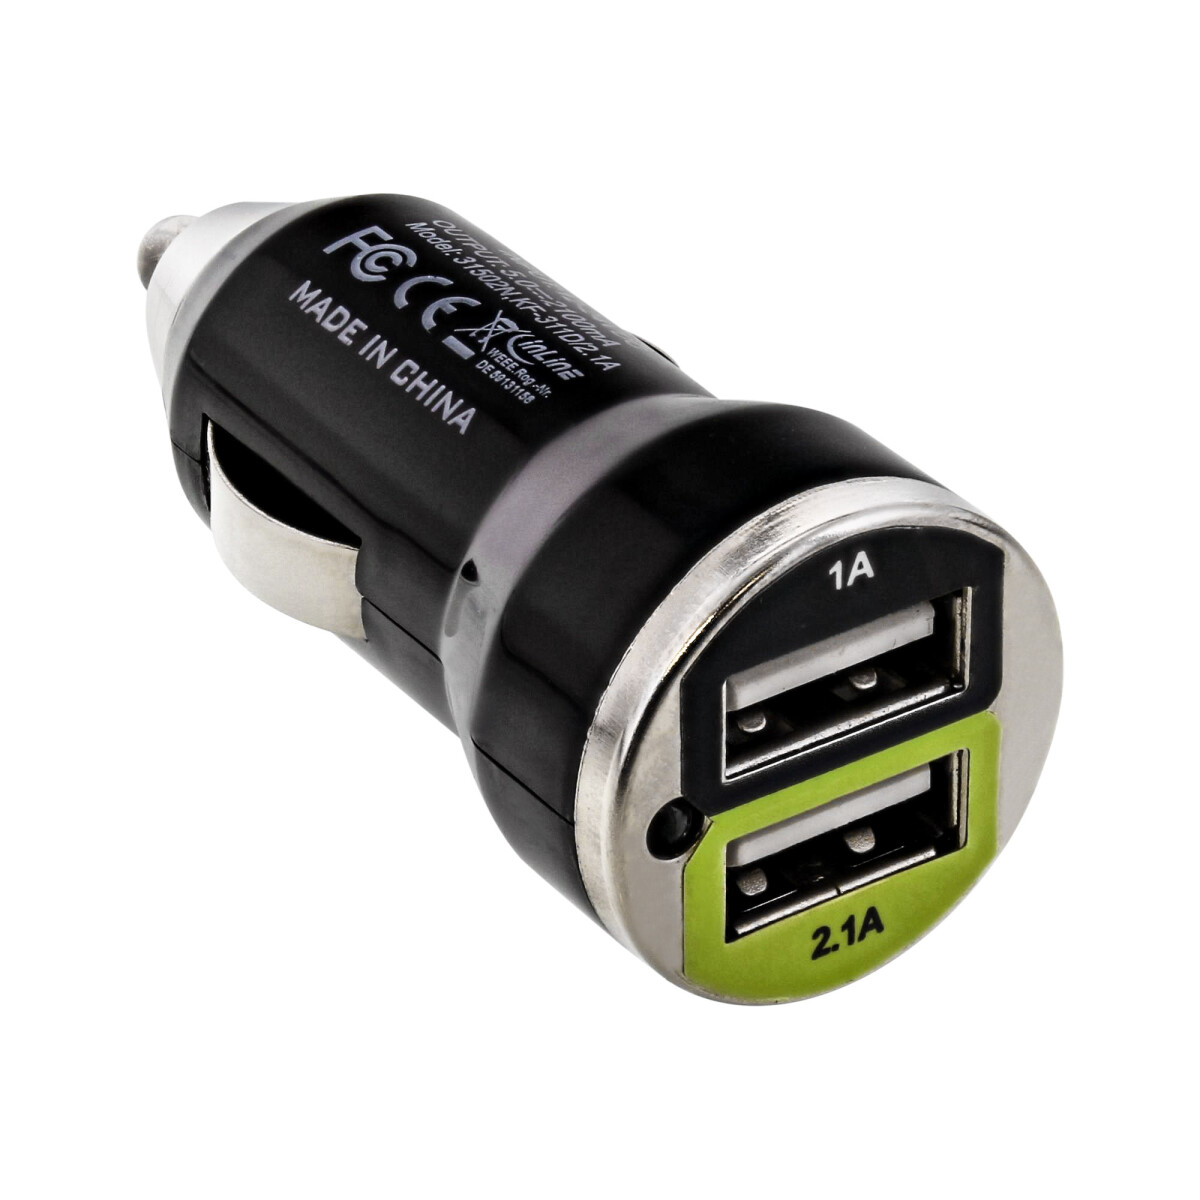 InLine® USB Car Charger + Power Adapter for any USB...